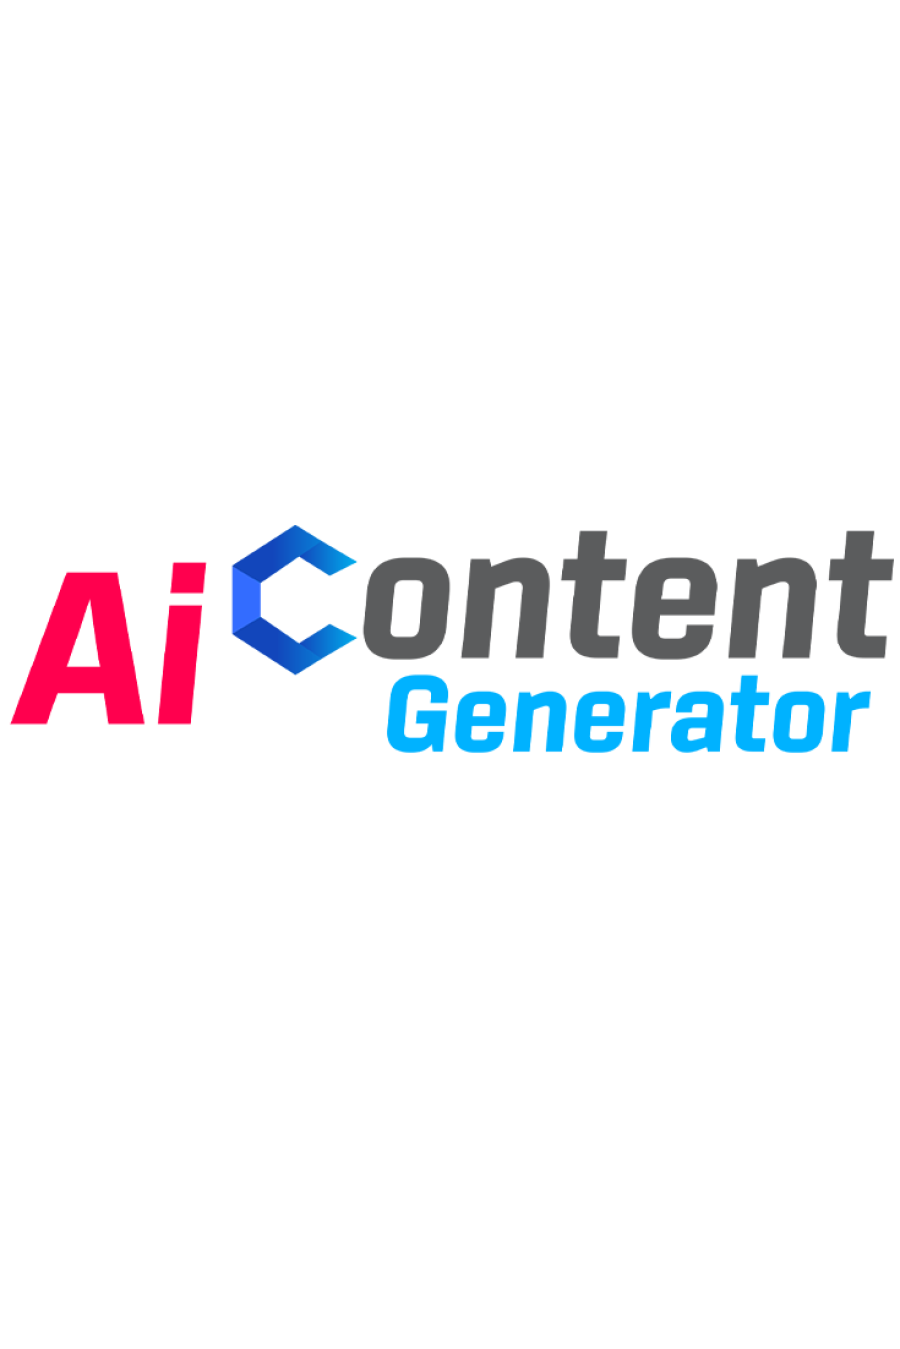 How to Use AI Content Generators to Improve Your Social Media Marketing